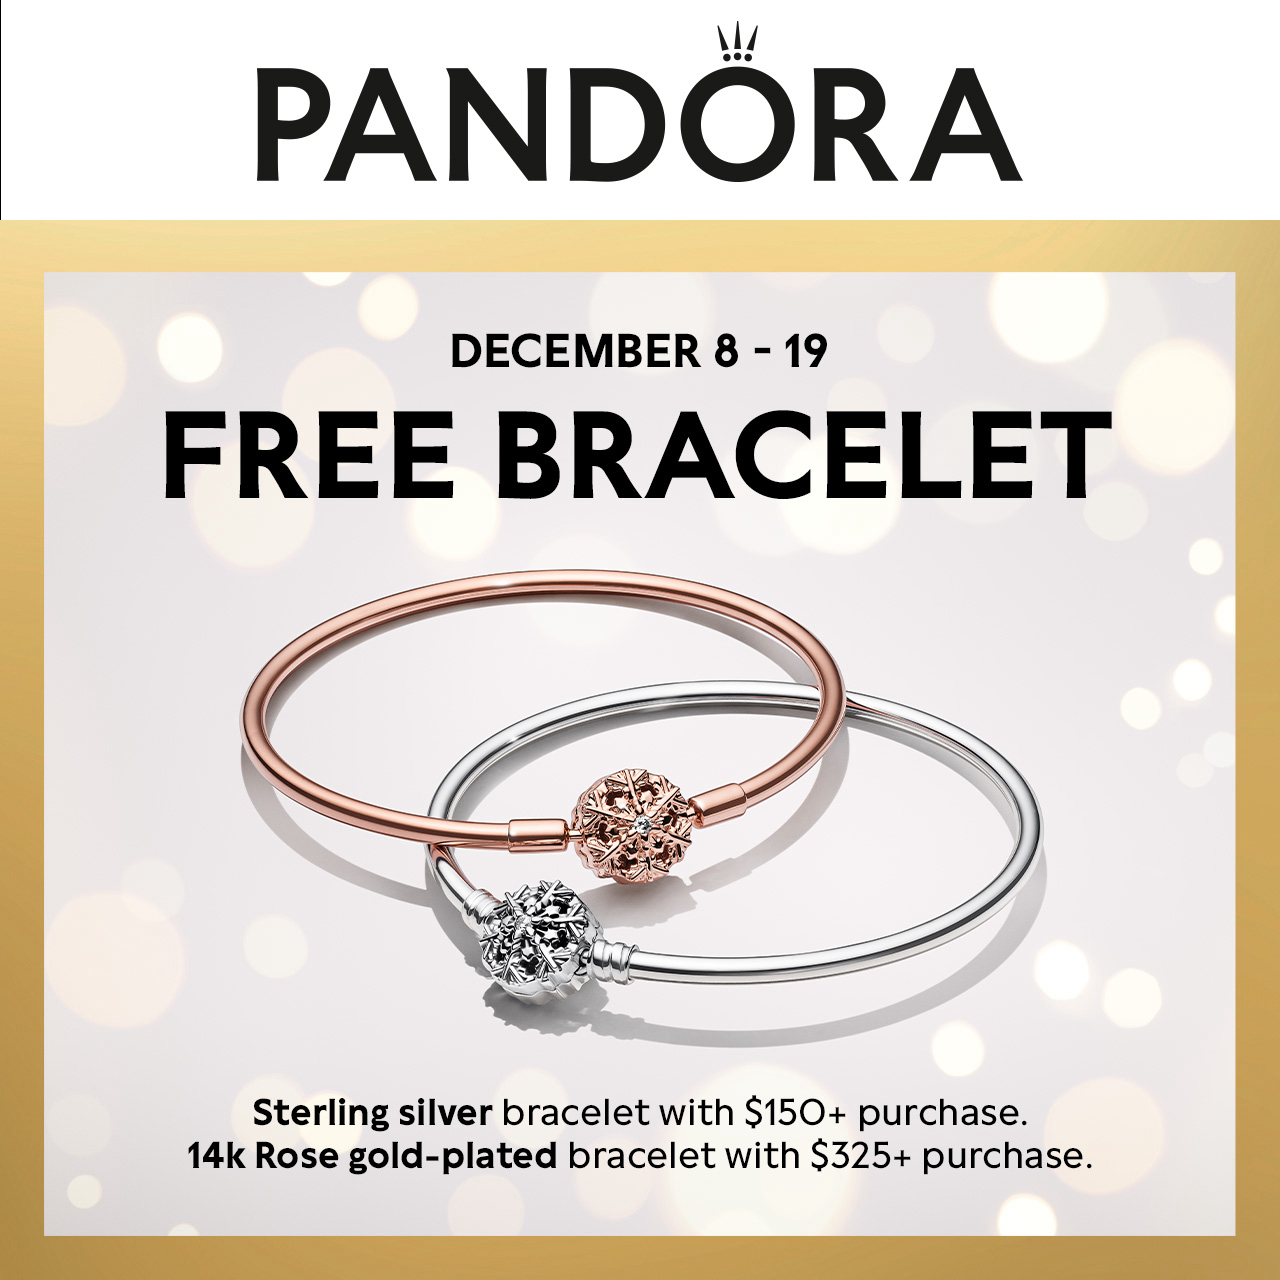 Pandora Campaign 66 Sterling silver bracelet with 150 purchase. 14k Rose gold plated bracelet with 325 purchase. EN 1280x1280 2